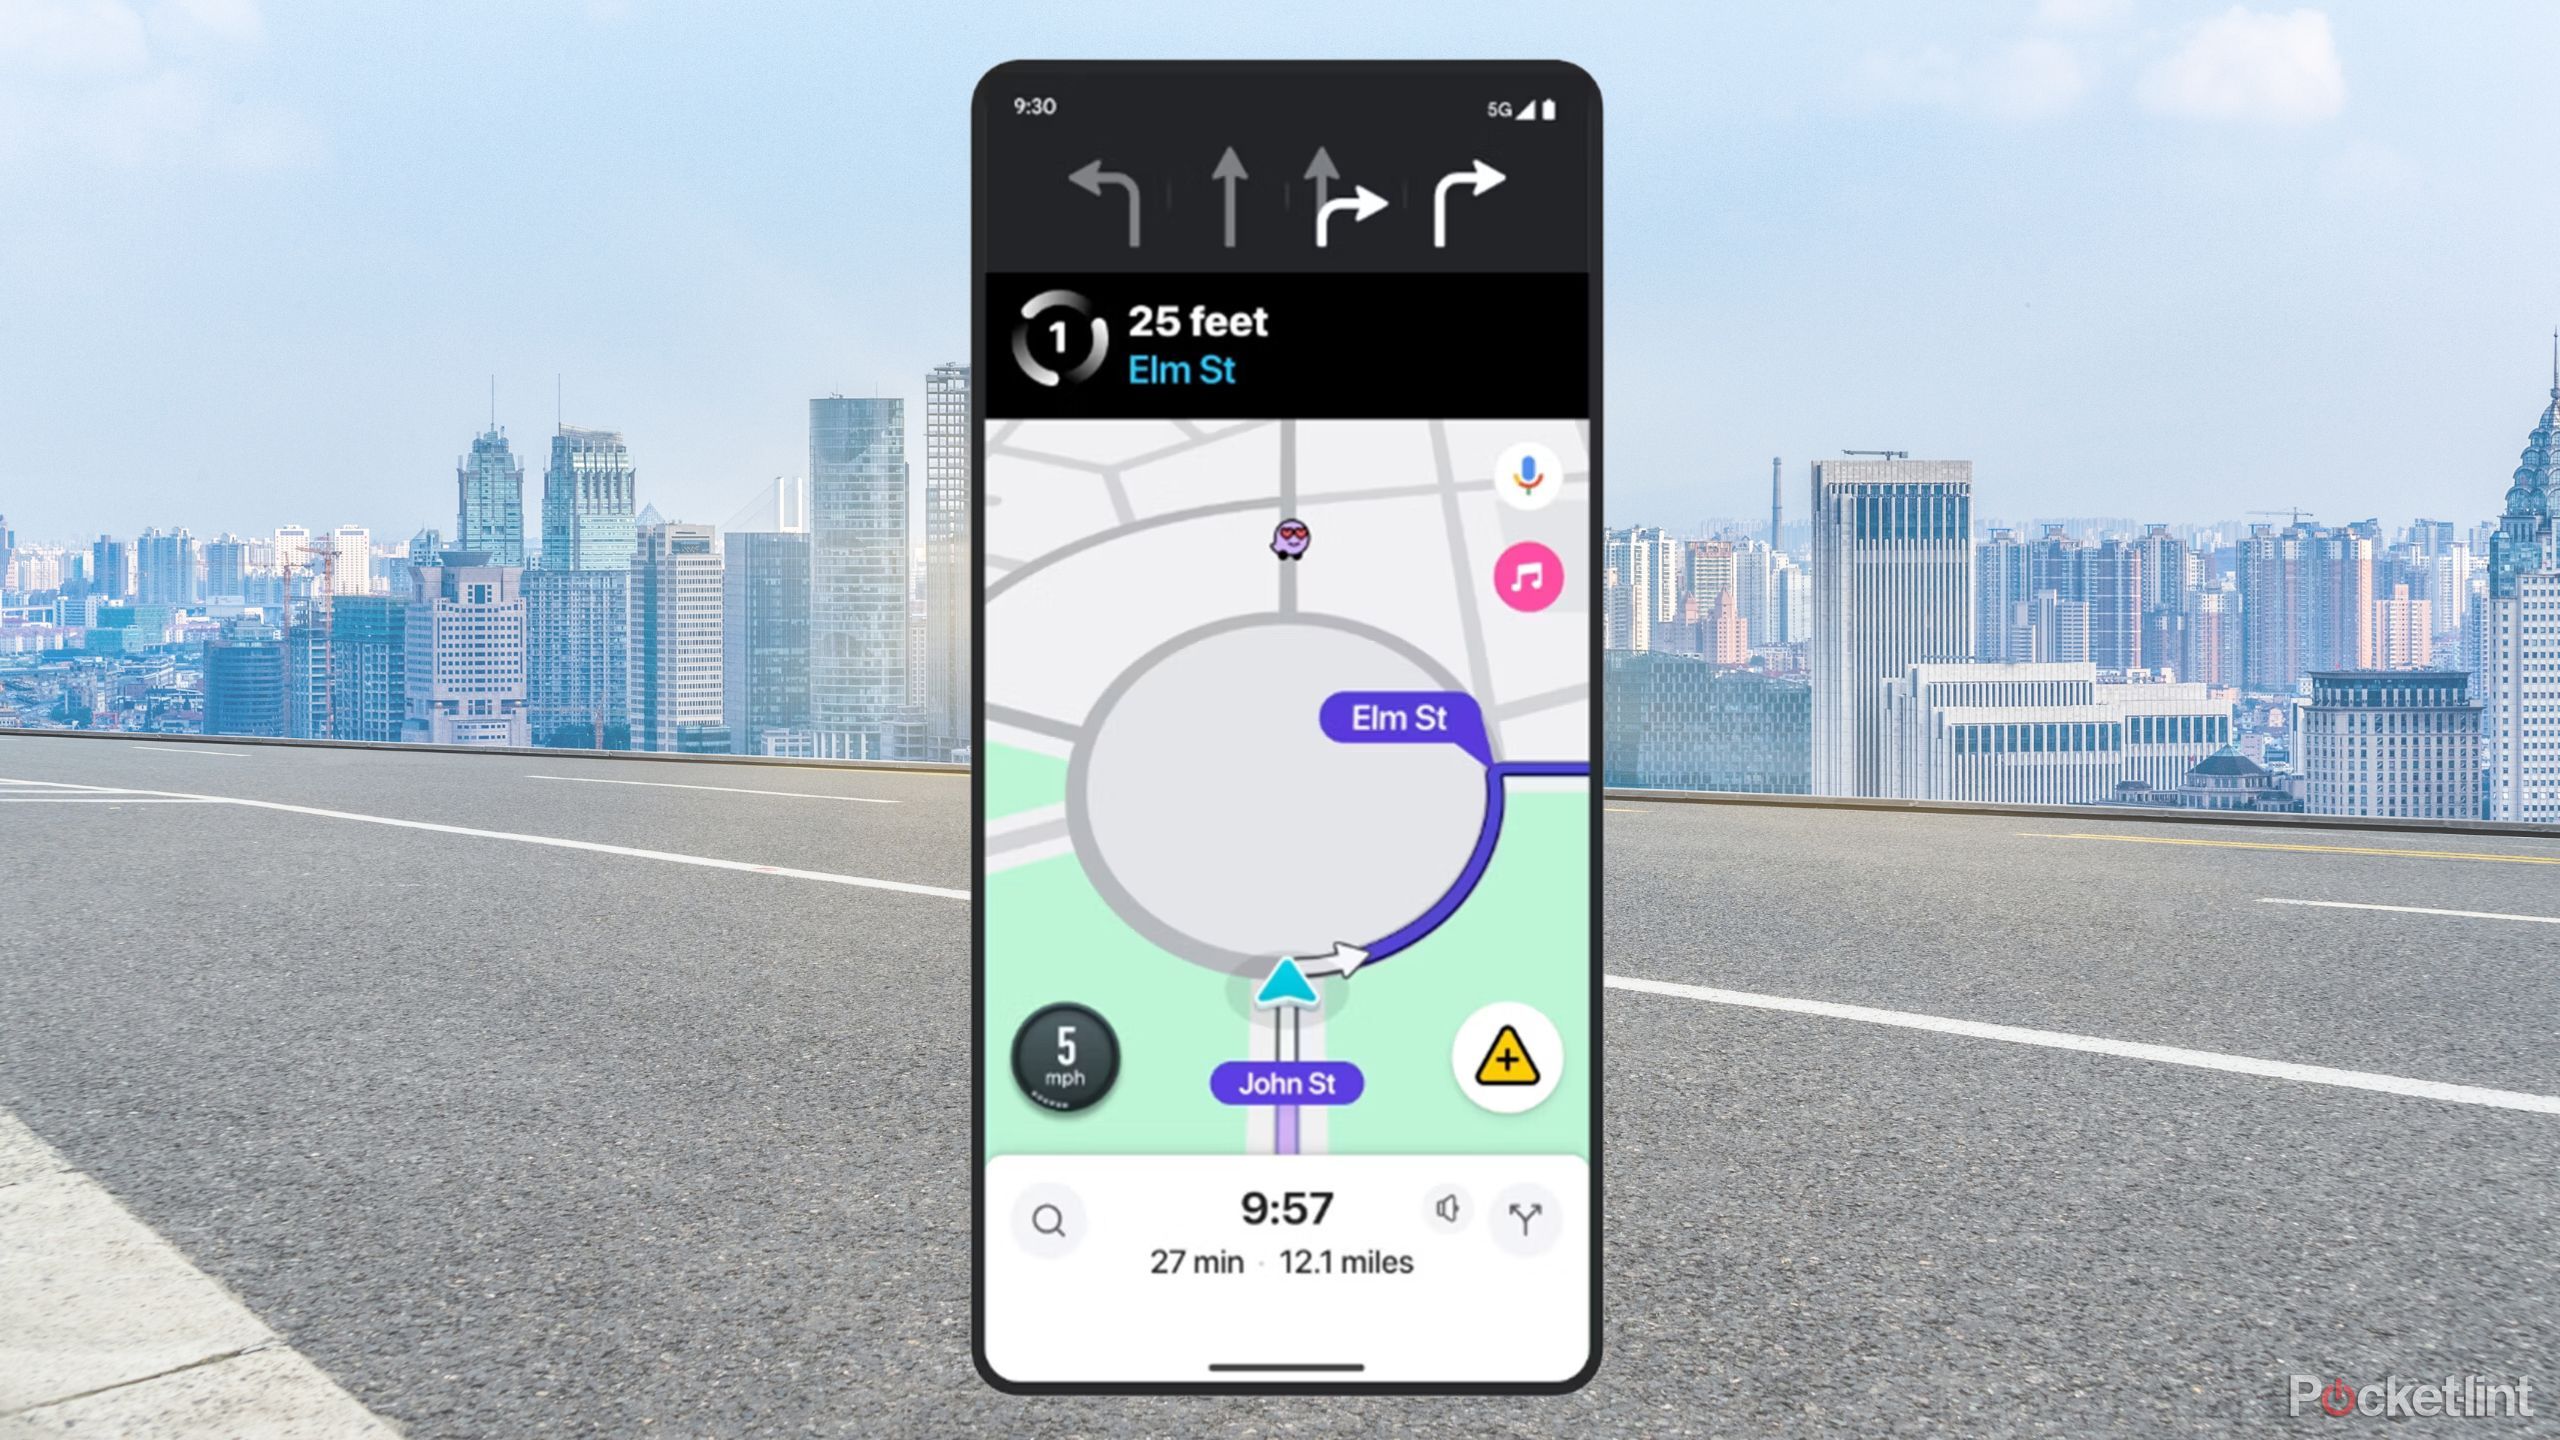 waze new features screenshot of navigating roundabouts over city road